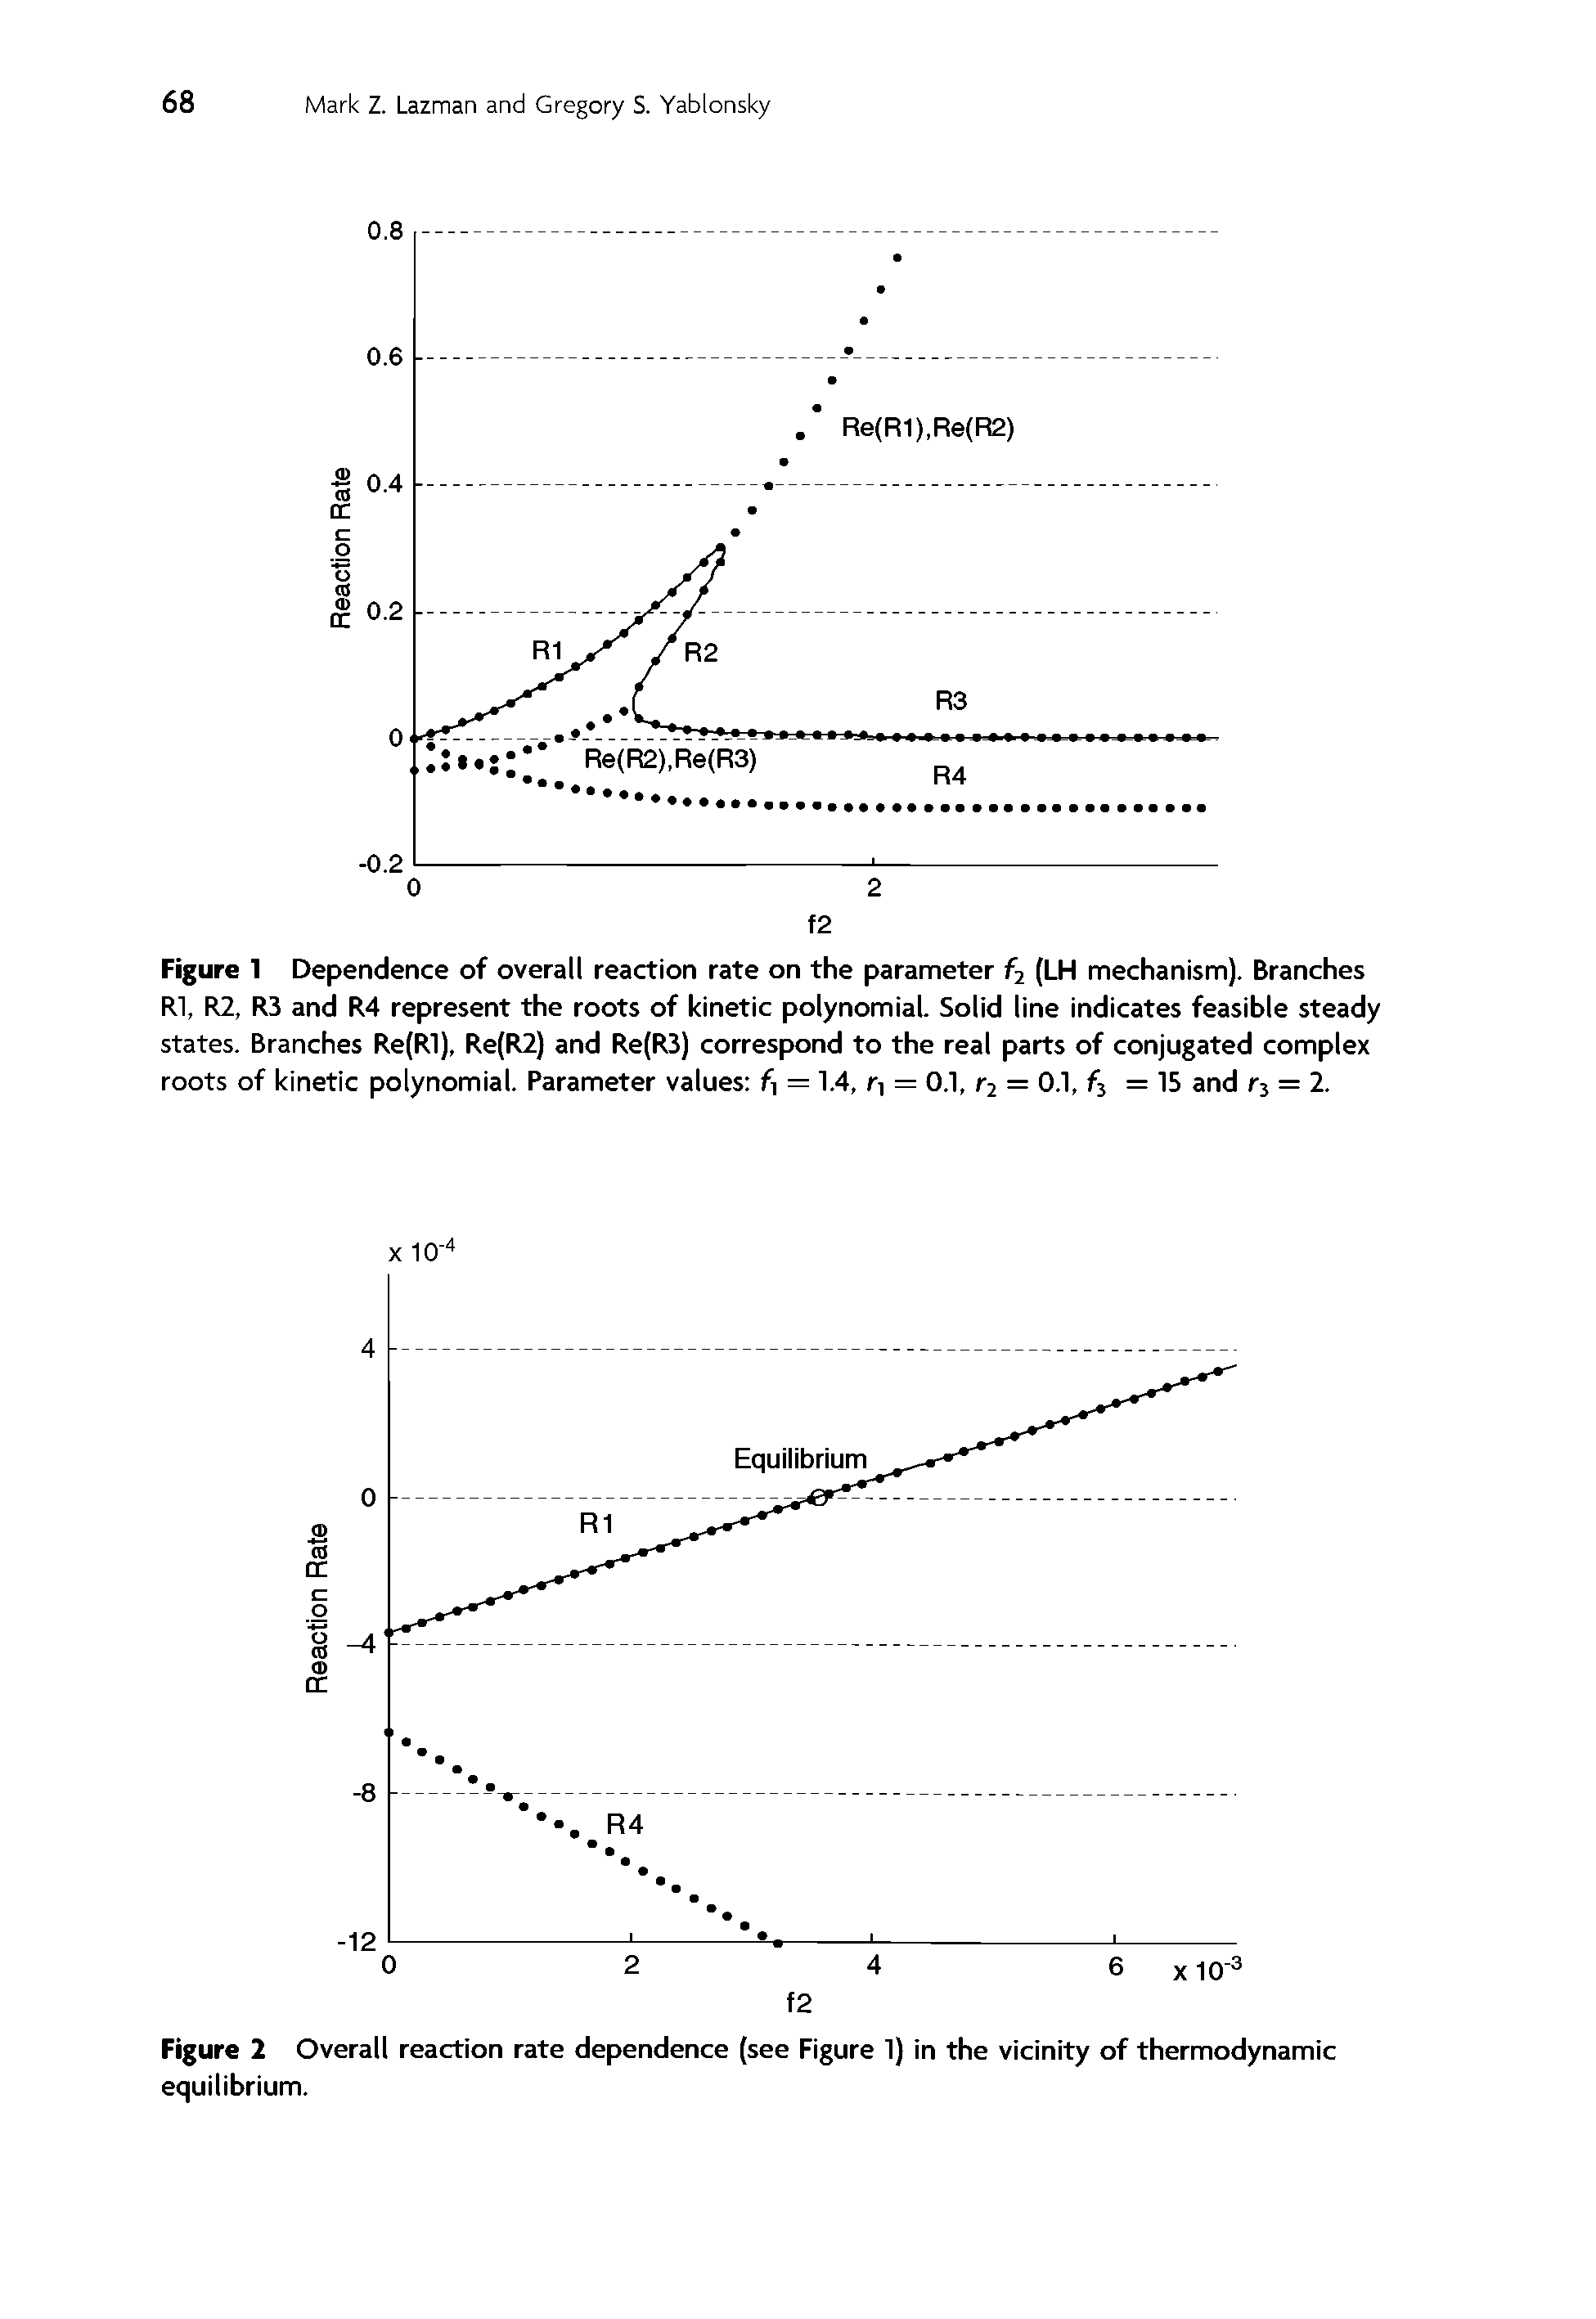 Figure 1 Dependence of overall reaction rate on the parameter 2 (LH mechanism). Branches Rl, R2, R3 and R4 represent the roots of kinetic polynomial. Solid line indicates feasible steady states. Branches Re(Rl), Re(R2) and Re(R3) correspond to the real parts of conjugated complex roots of kinetic polynomial. Parameter values fi = 1.4, — 0.1, t2 = 0.1, fj = 15 and rj = 2.